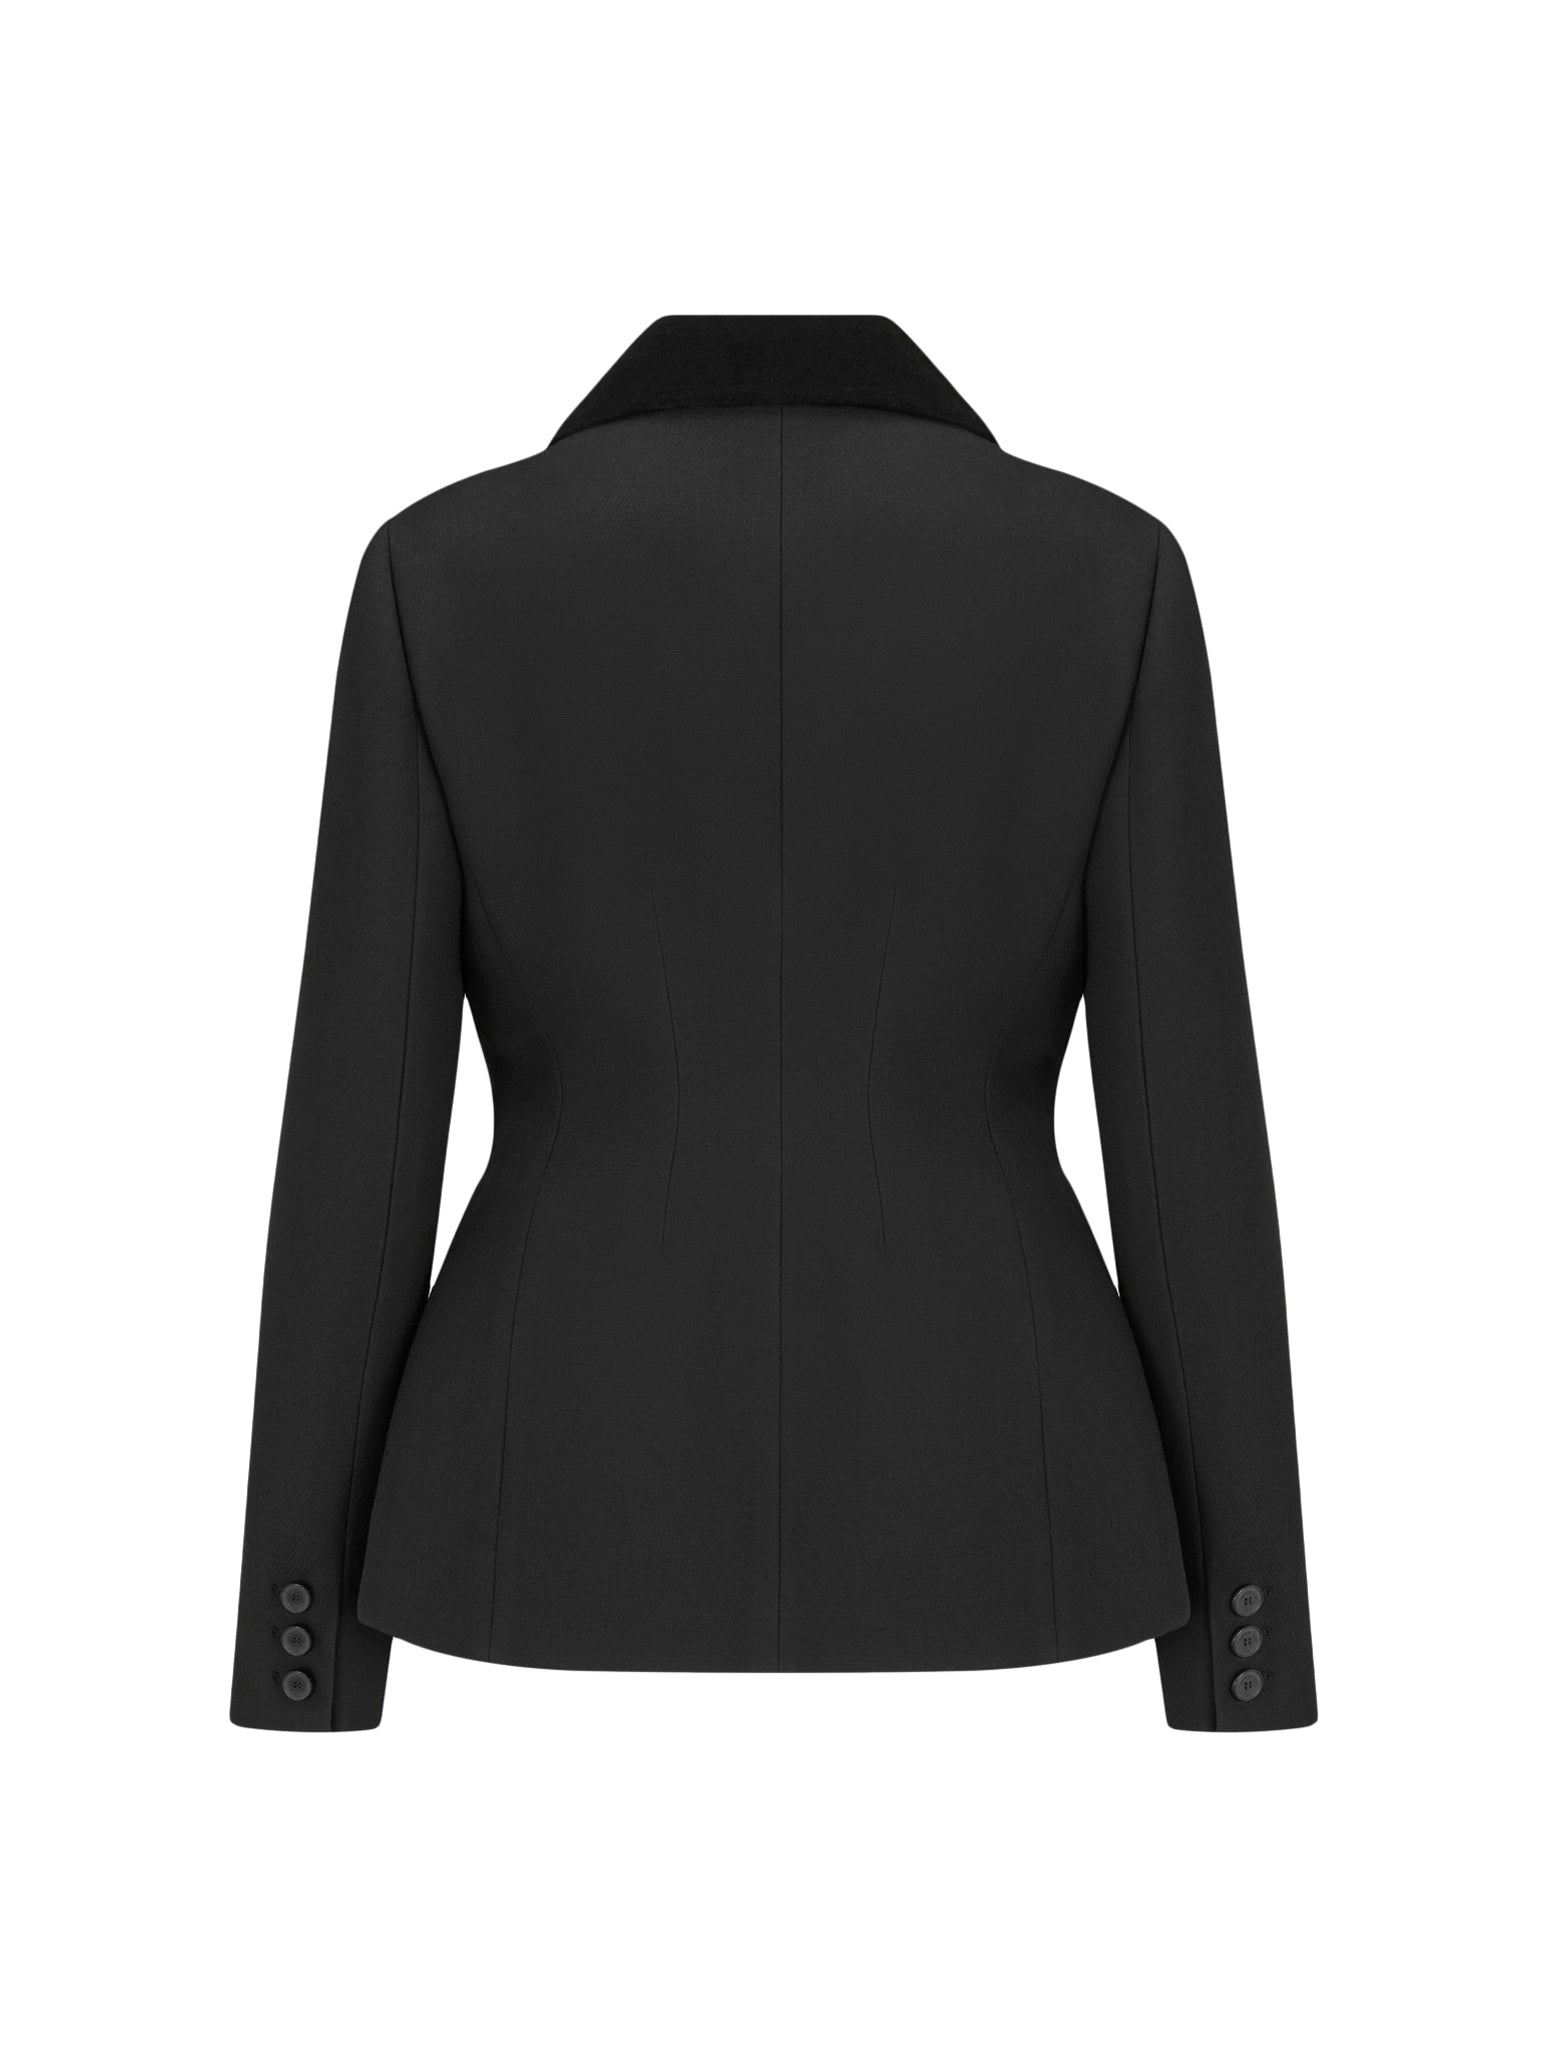 FITTED JACKET in black wool and silk with velvet effect